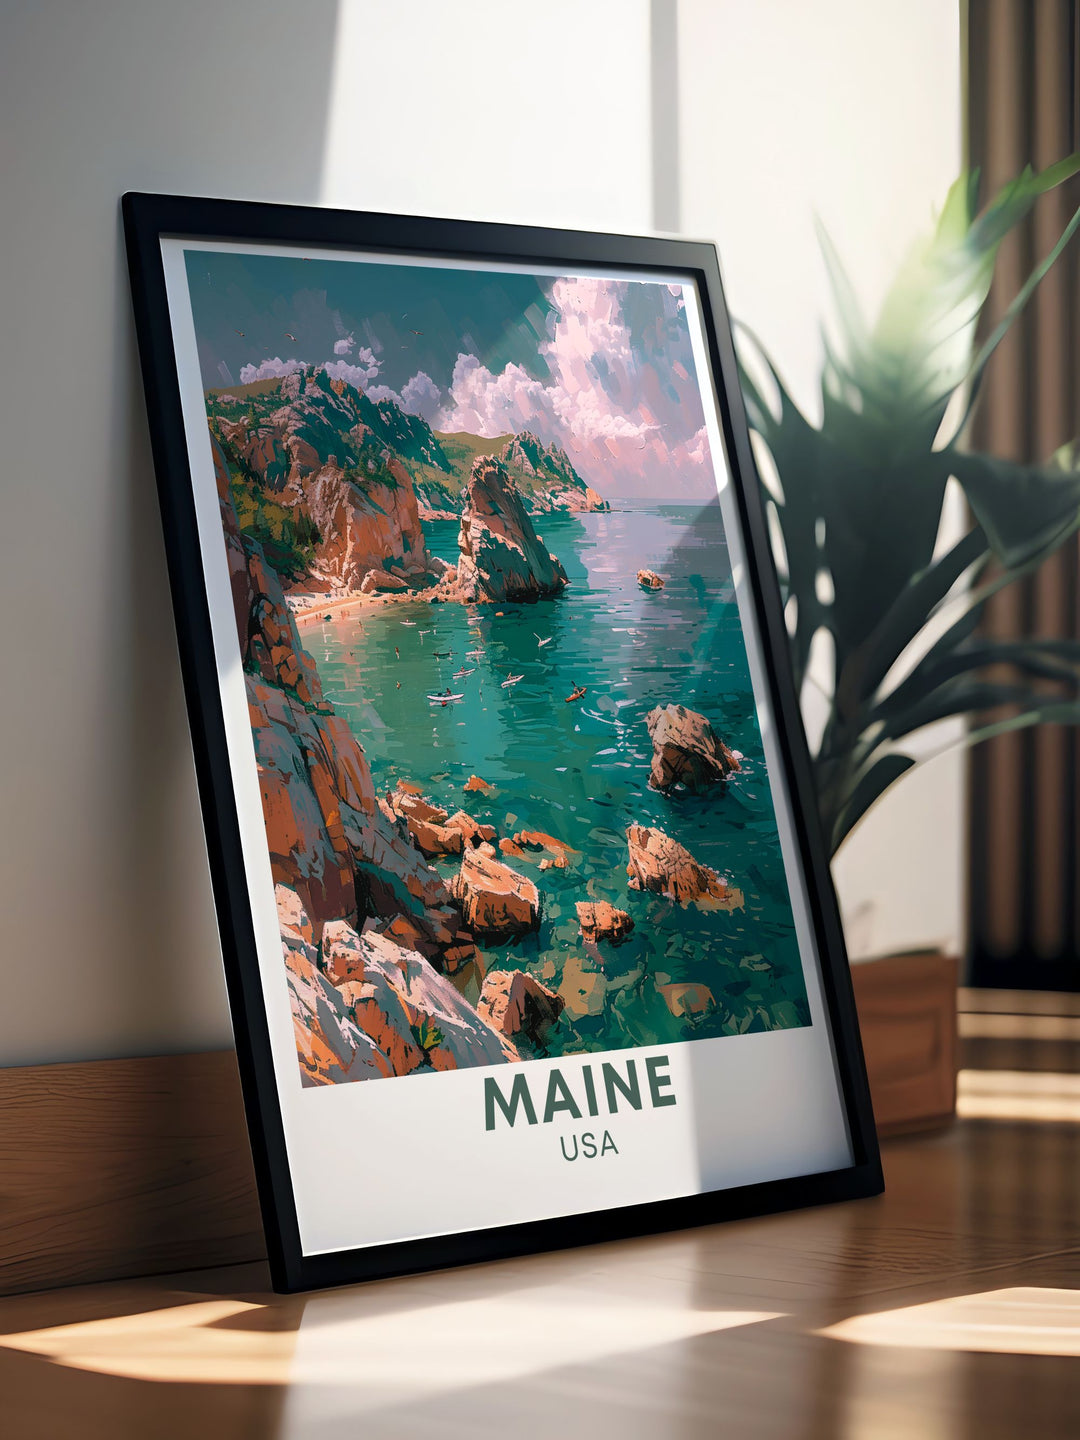 Acadia National Park, located on Mount Desert Island, is highlighted in this poster. Its iconic features such as Cadillac Mountain and Jordan Pond are beautifully captured, making it a perfect piece for those who enjoy scenic landscapes.